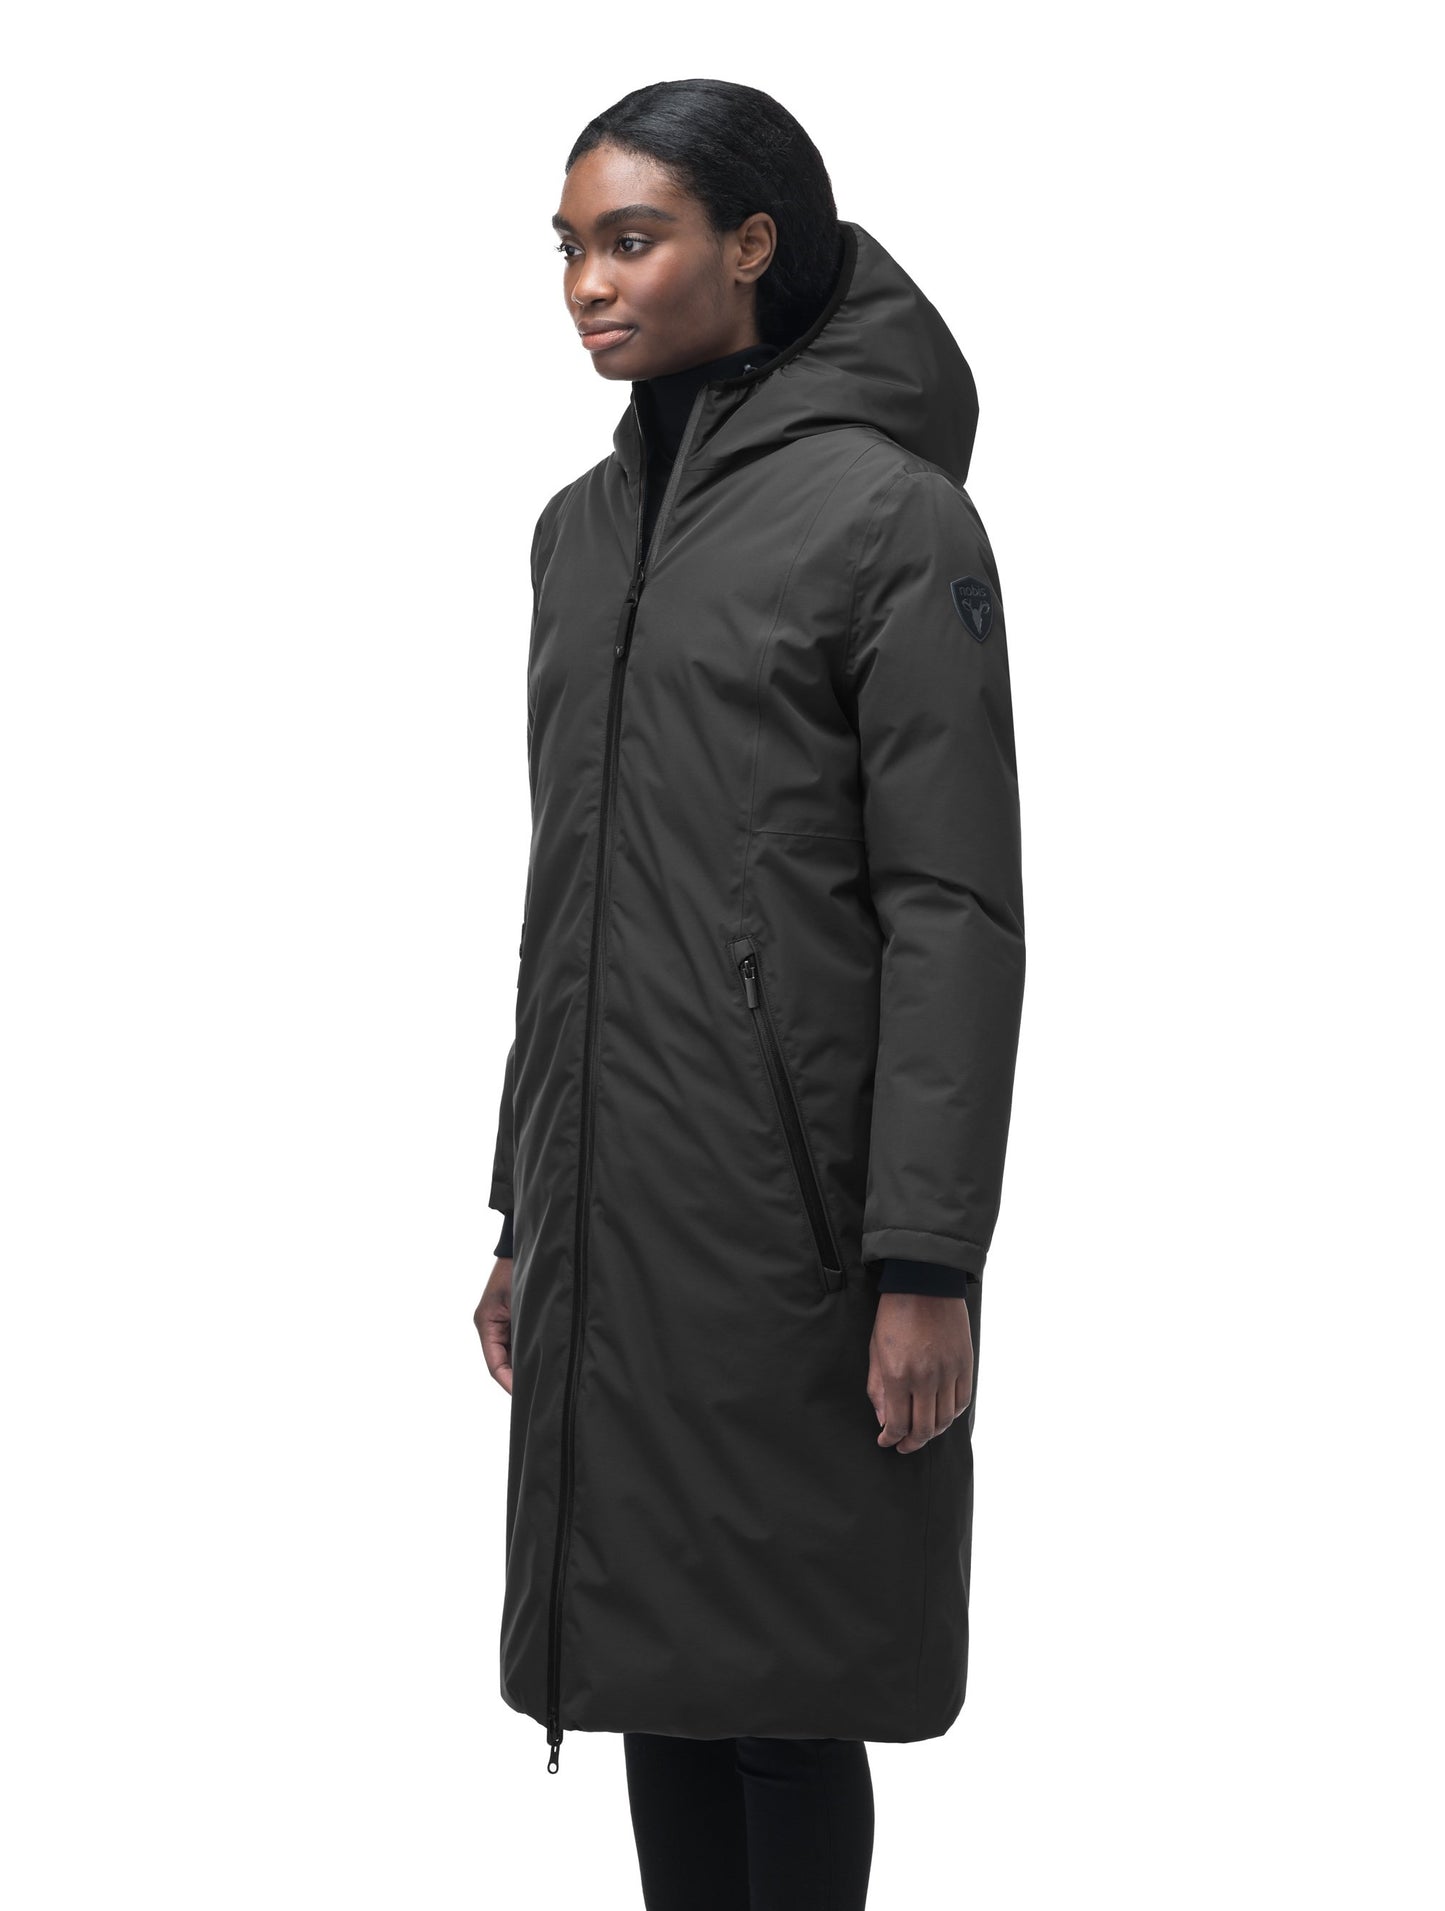 Ladies knee length reversible down-filled parka with non-removable hood in Black